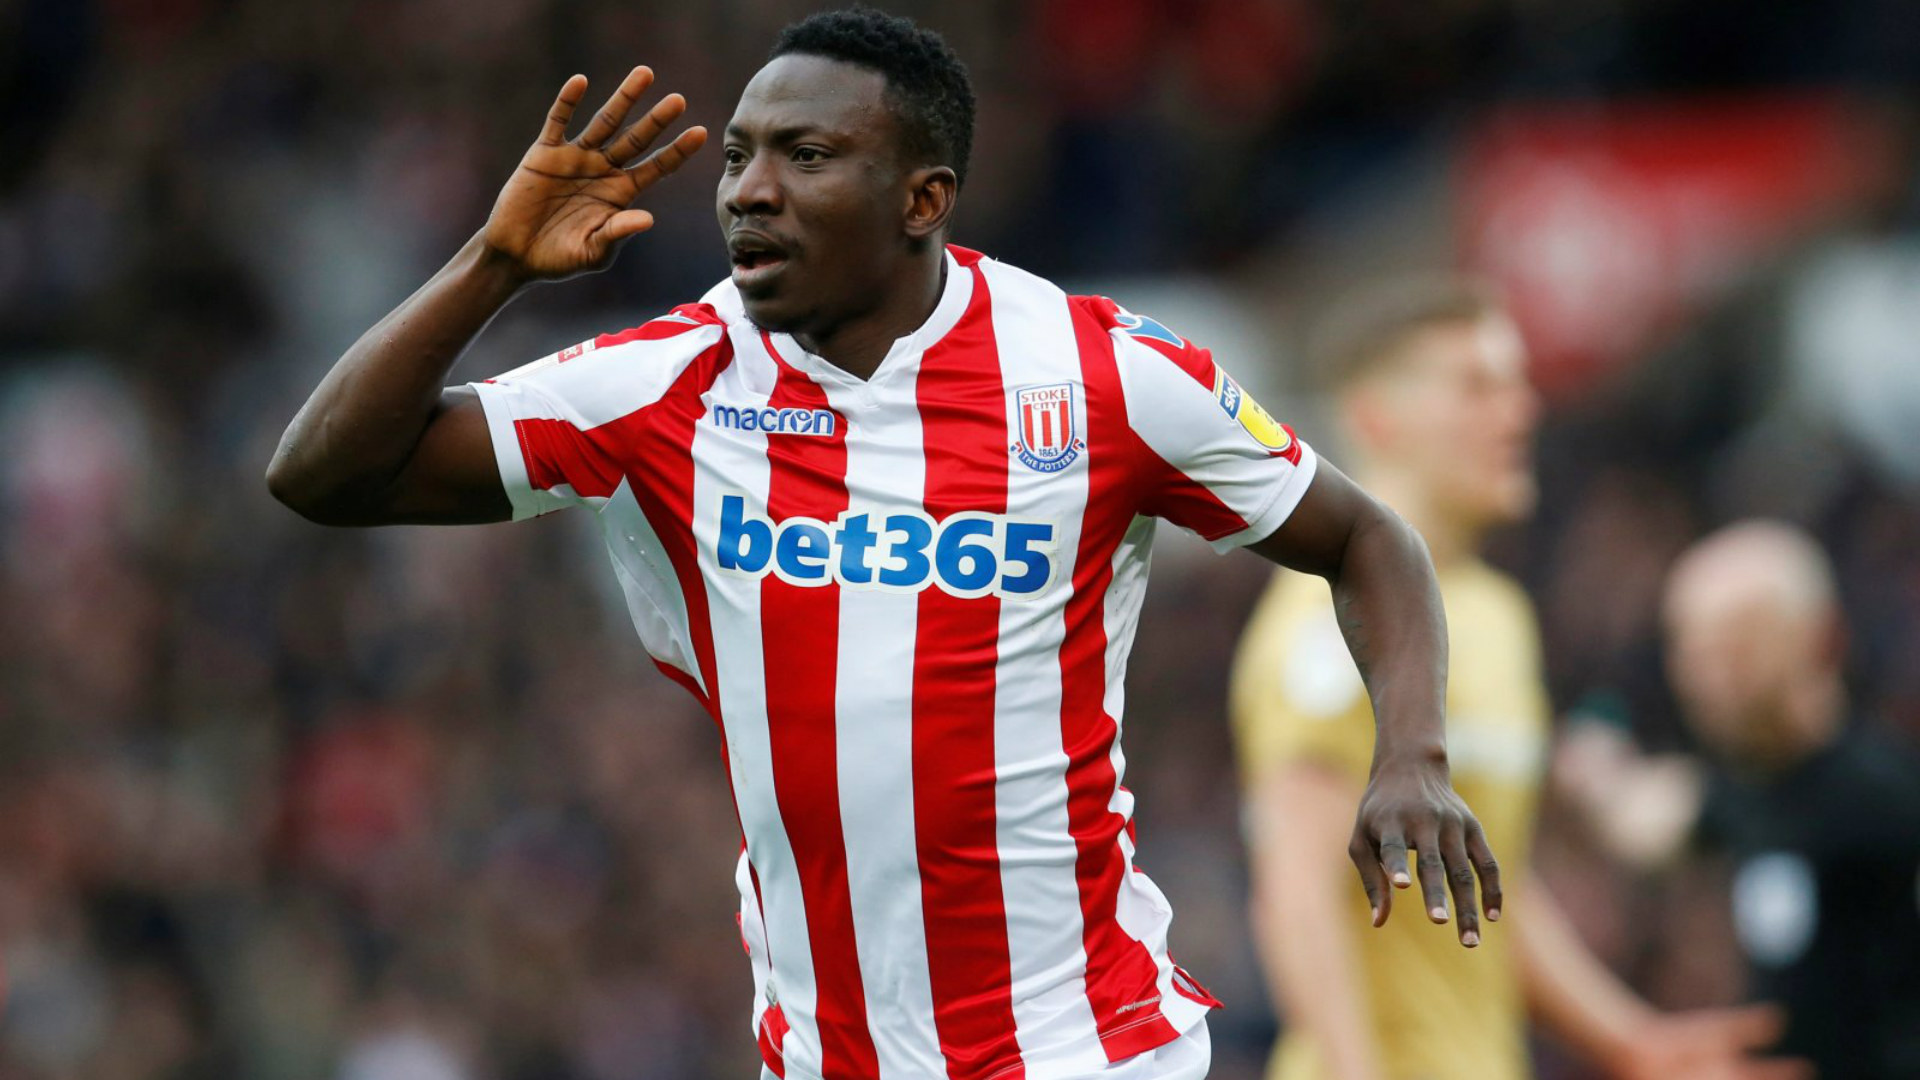 Etebo: Watford will give everything in the Premier League